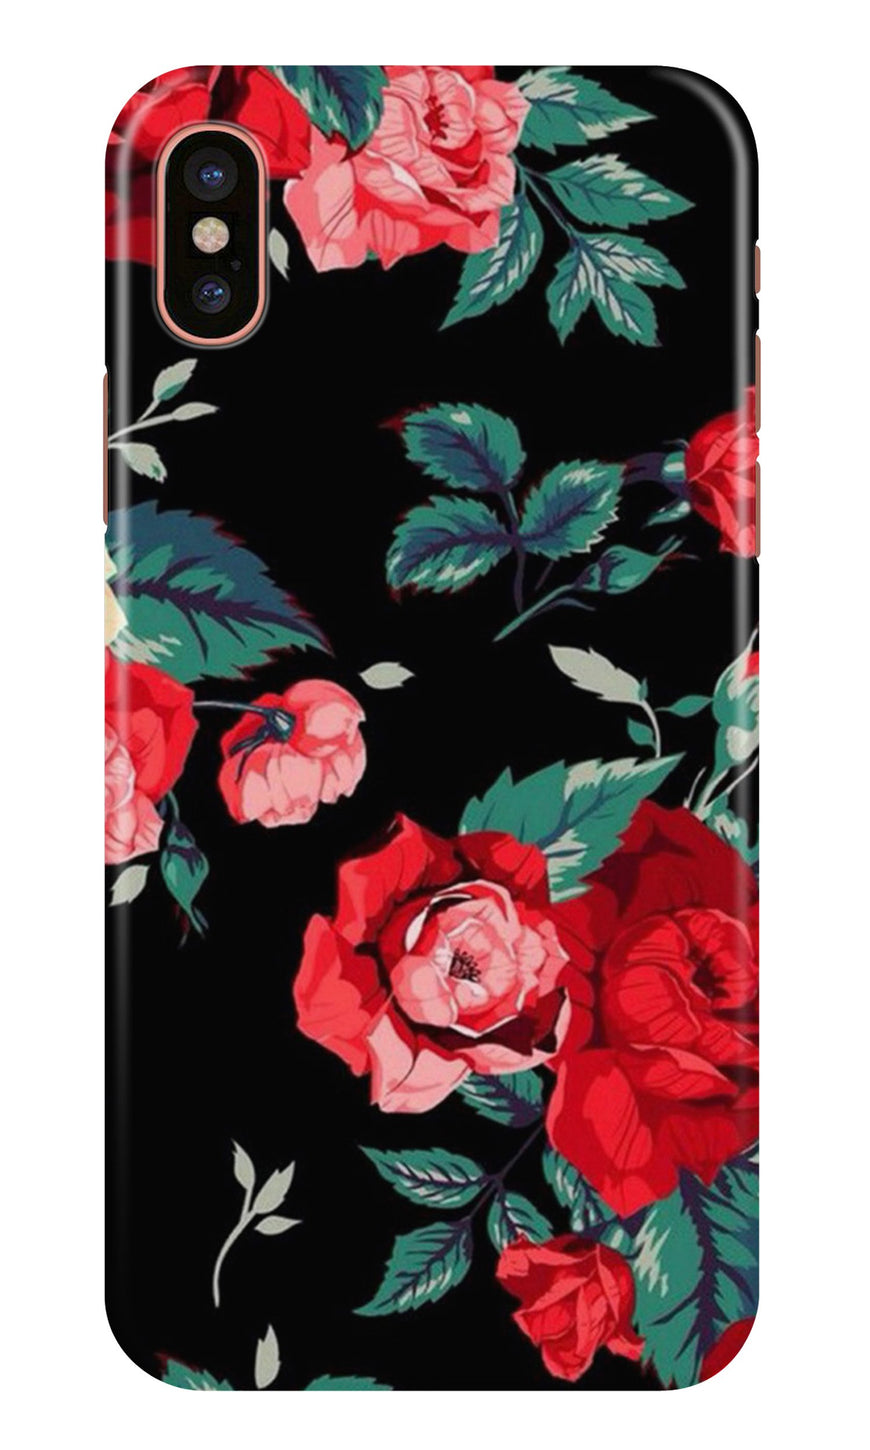 Red Rose2 Case for iPhone X